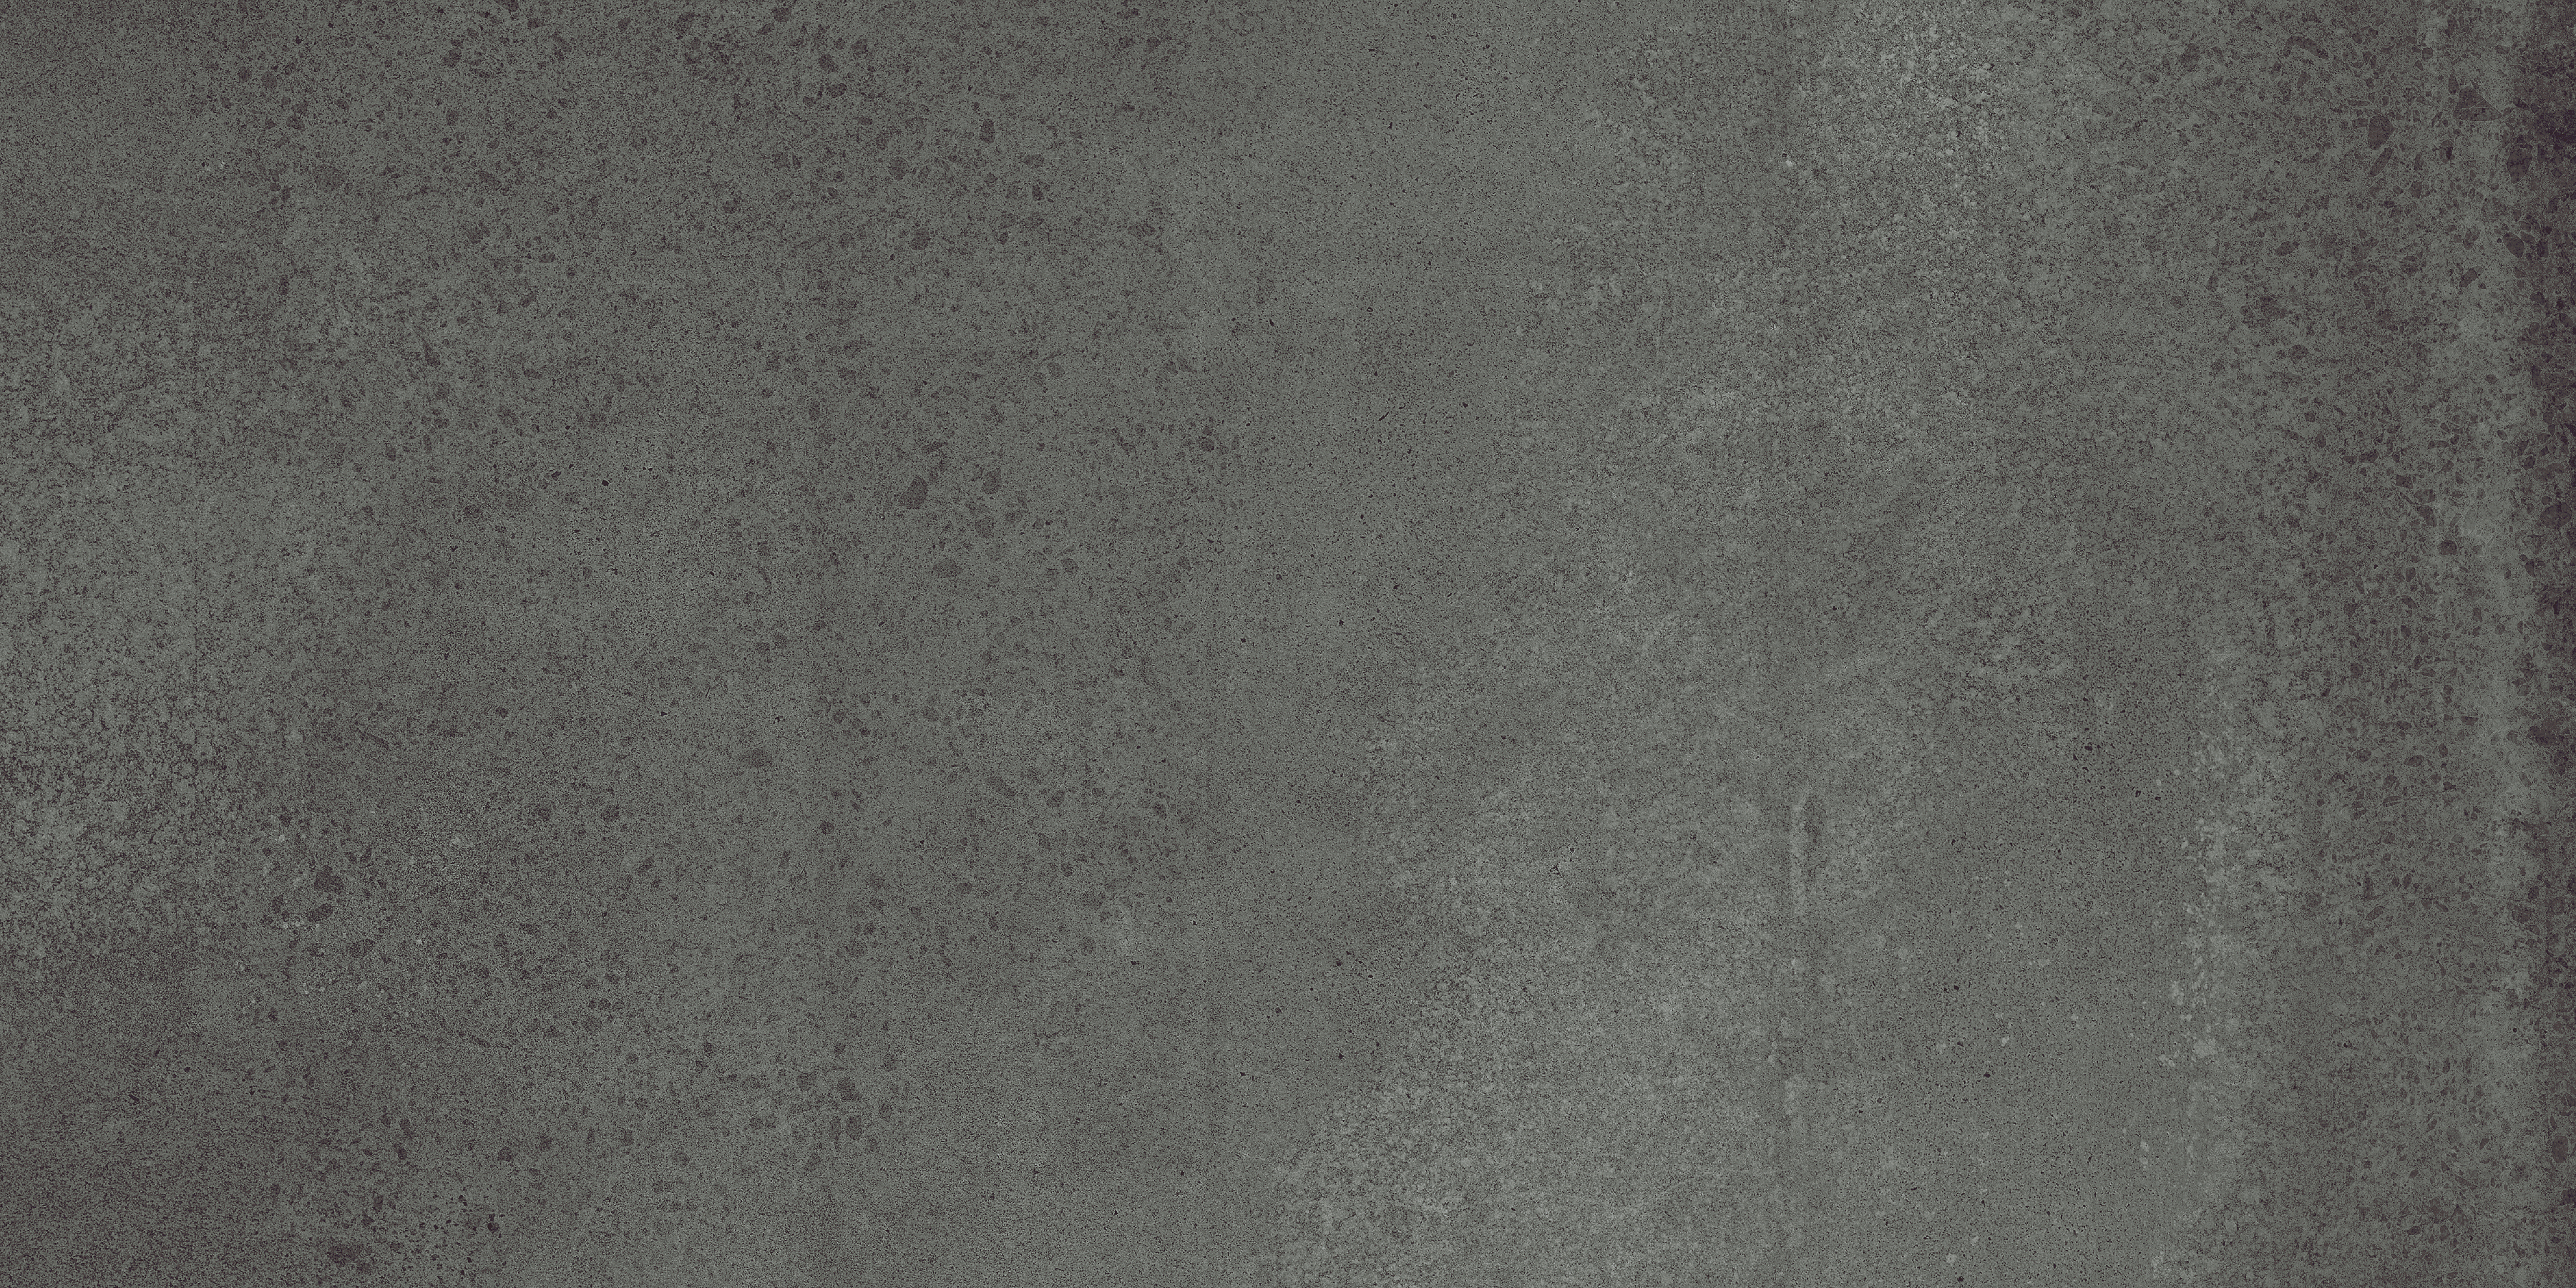 graphite pattern color body porcelain field tile from industria anatolia collection distributed by surface group international matte finish rectified edge 12x24 rectangle shape